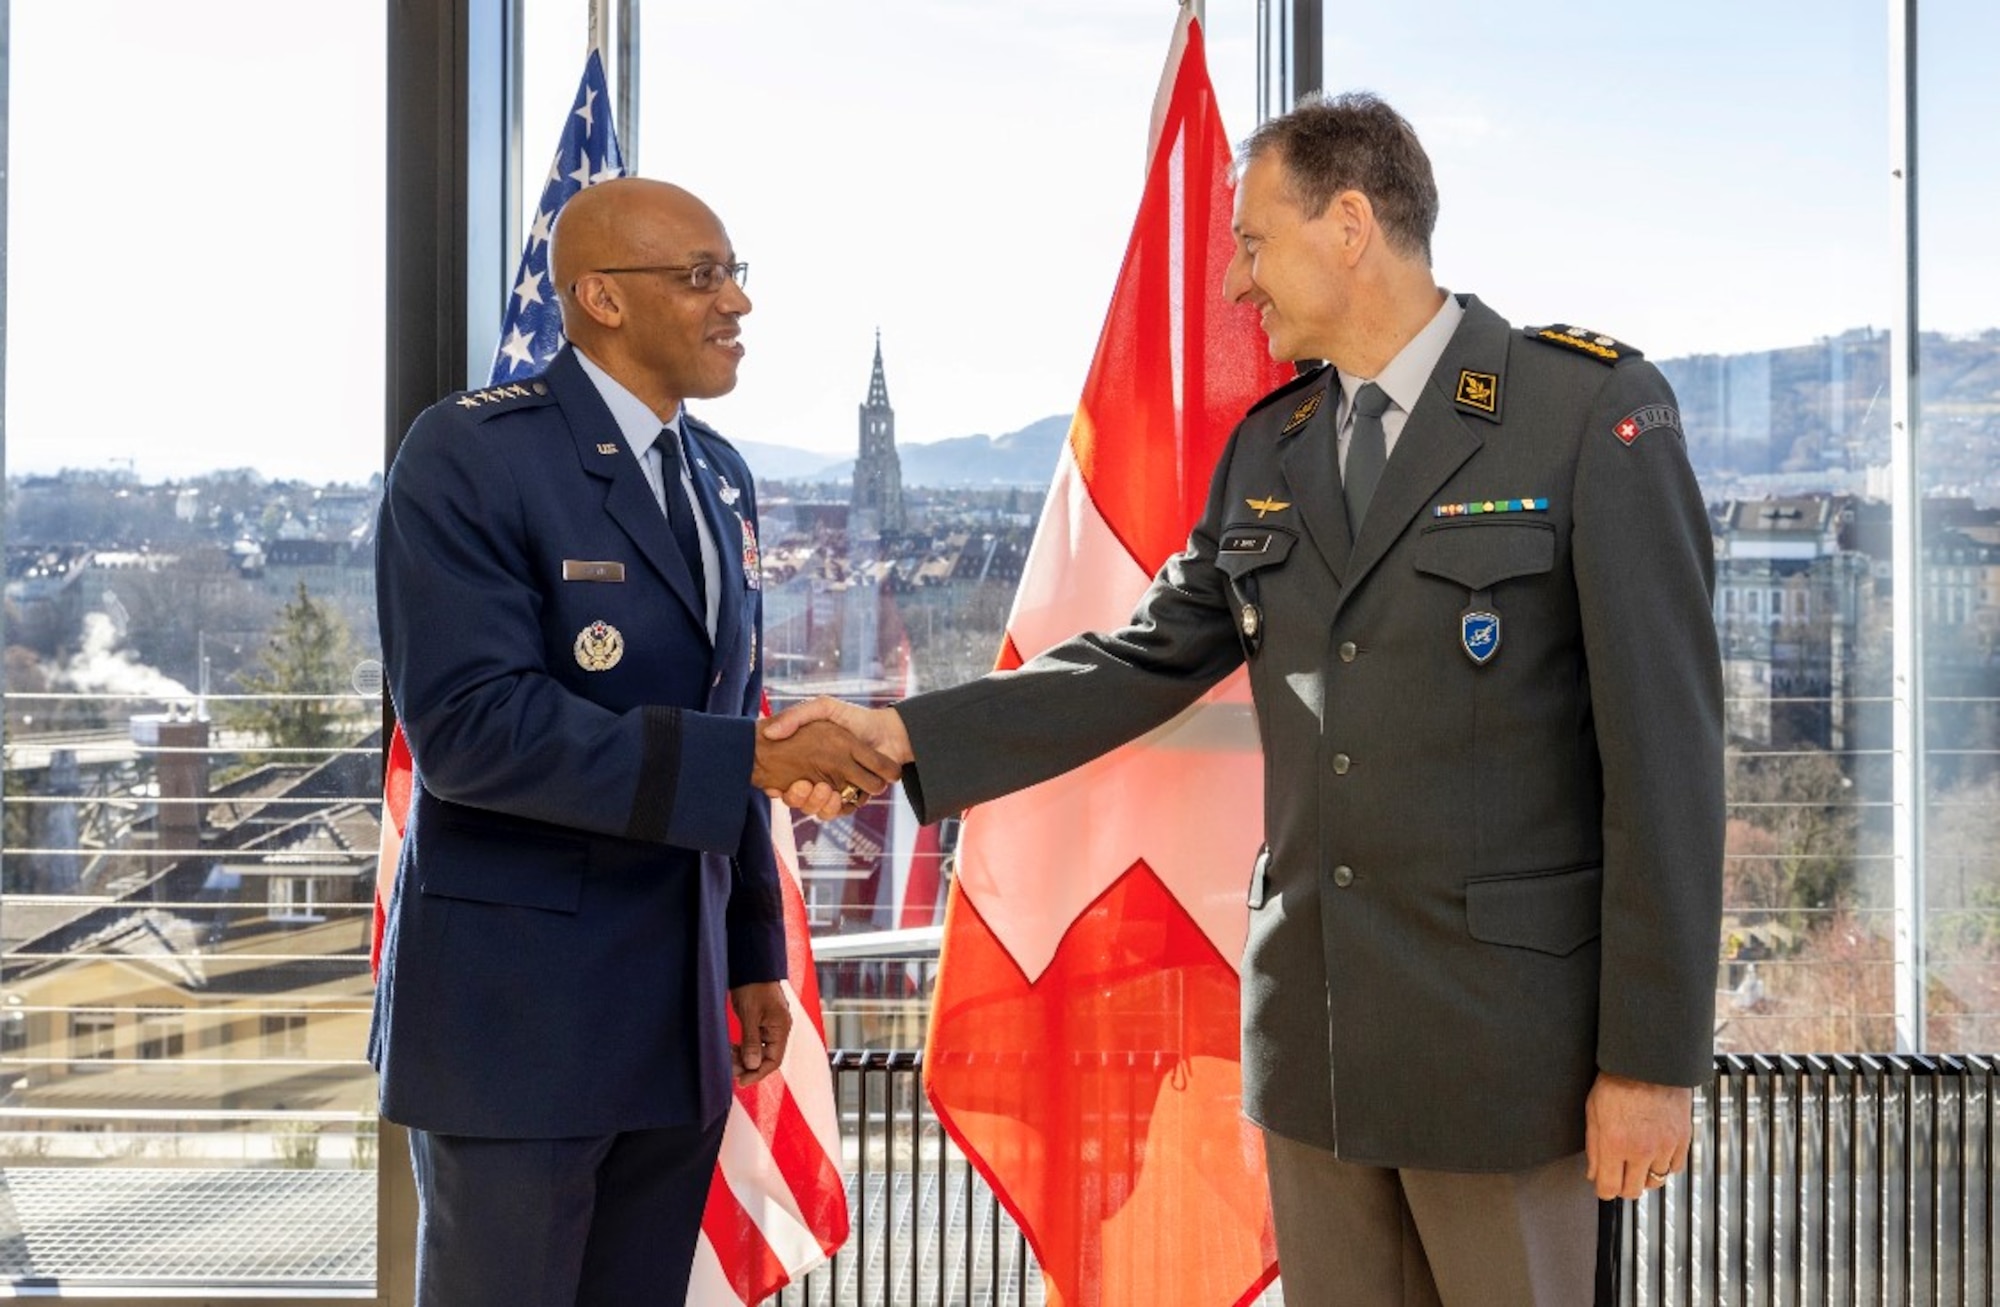 Air Force Chief of Staff Gen. CQ Brown, Jr., traveled to Switzerland March 12-15. The scheduled visit highlighted the U.S. Air Force’s commitment to the U.S.-Switzerland bilateral defense partnership and regional security in Europe. (Courtesy photo)